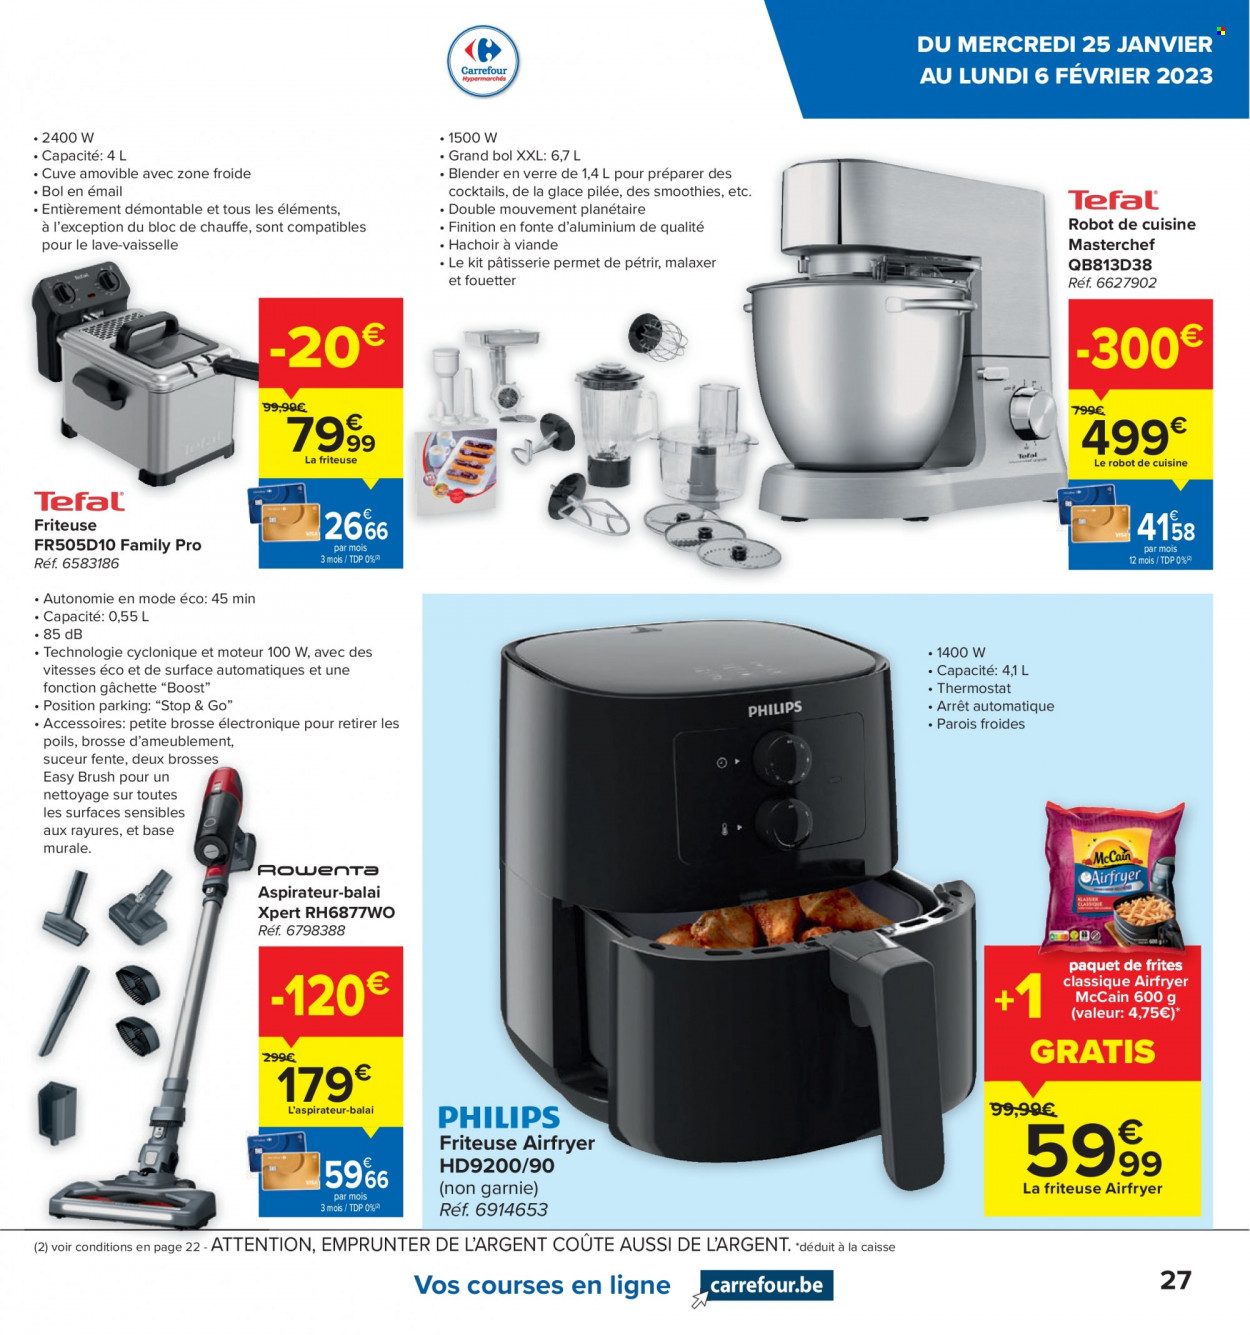 Catalogue Carrefour hypermarkt - 25.1.2023 - 6.2.2023. Page 7.